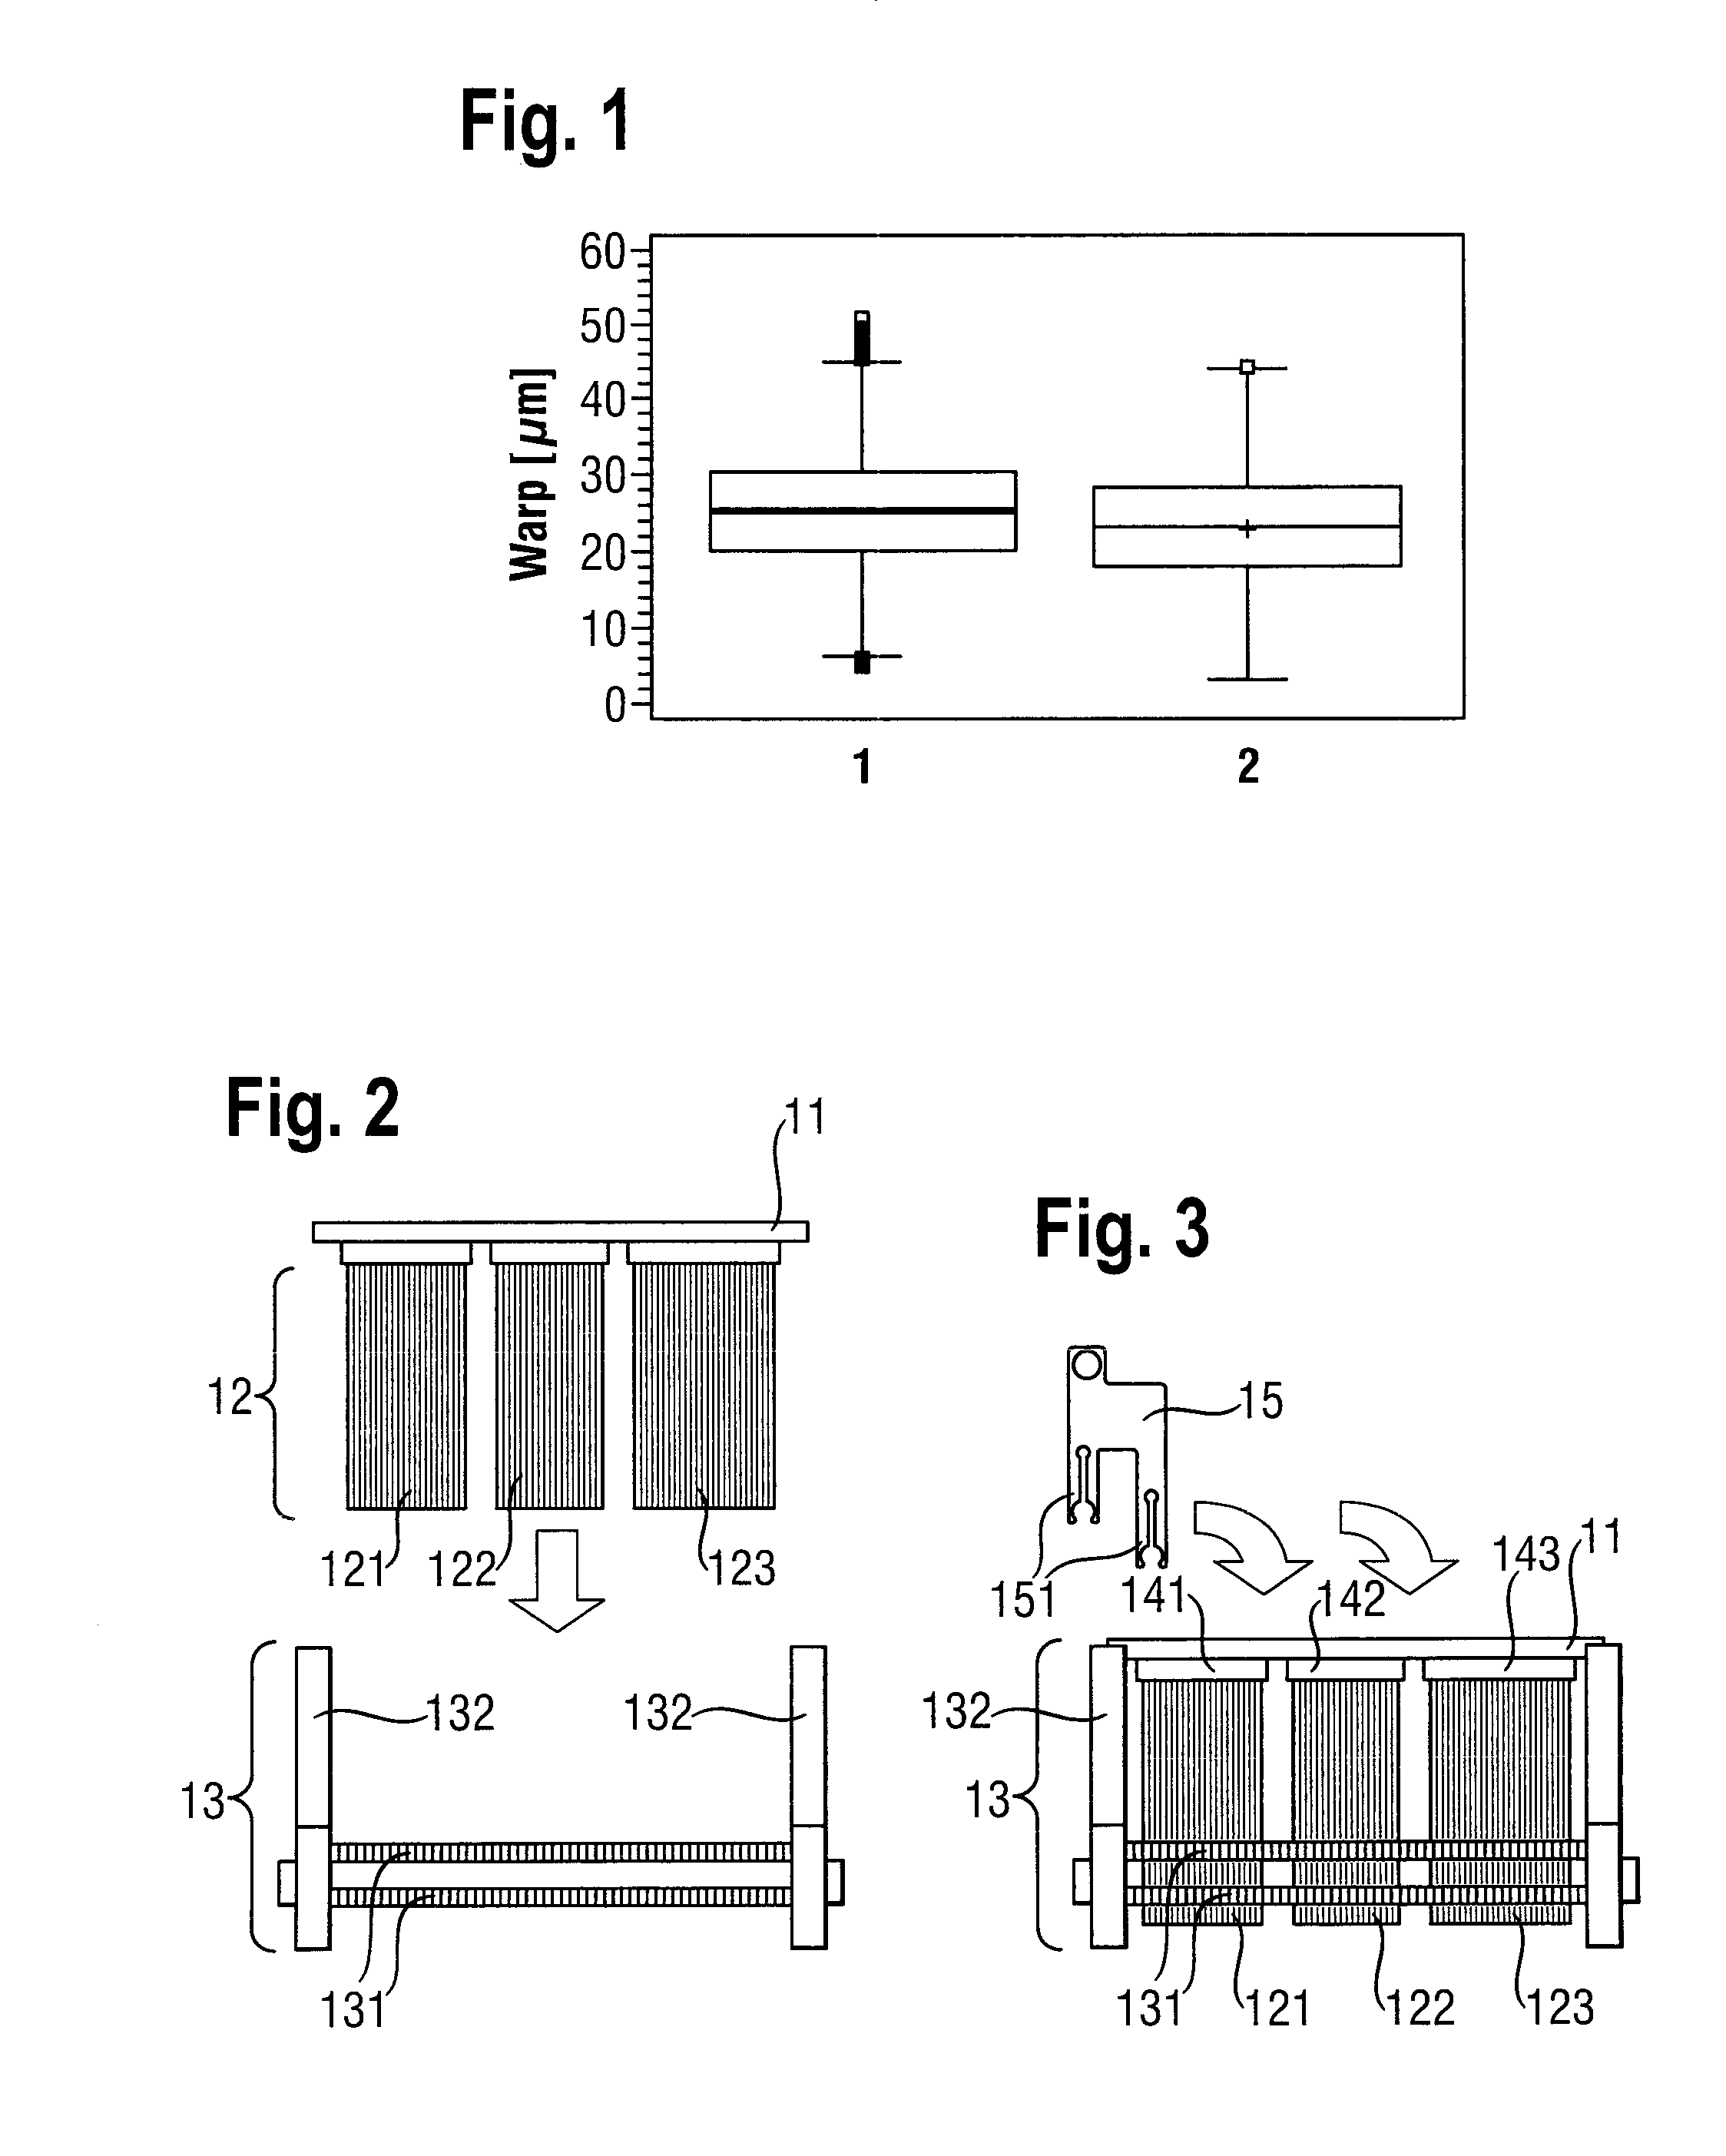 Method for simultaneously slicing at least two cylindrical workpieces into a multiplicity of wafers